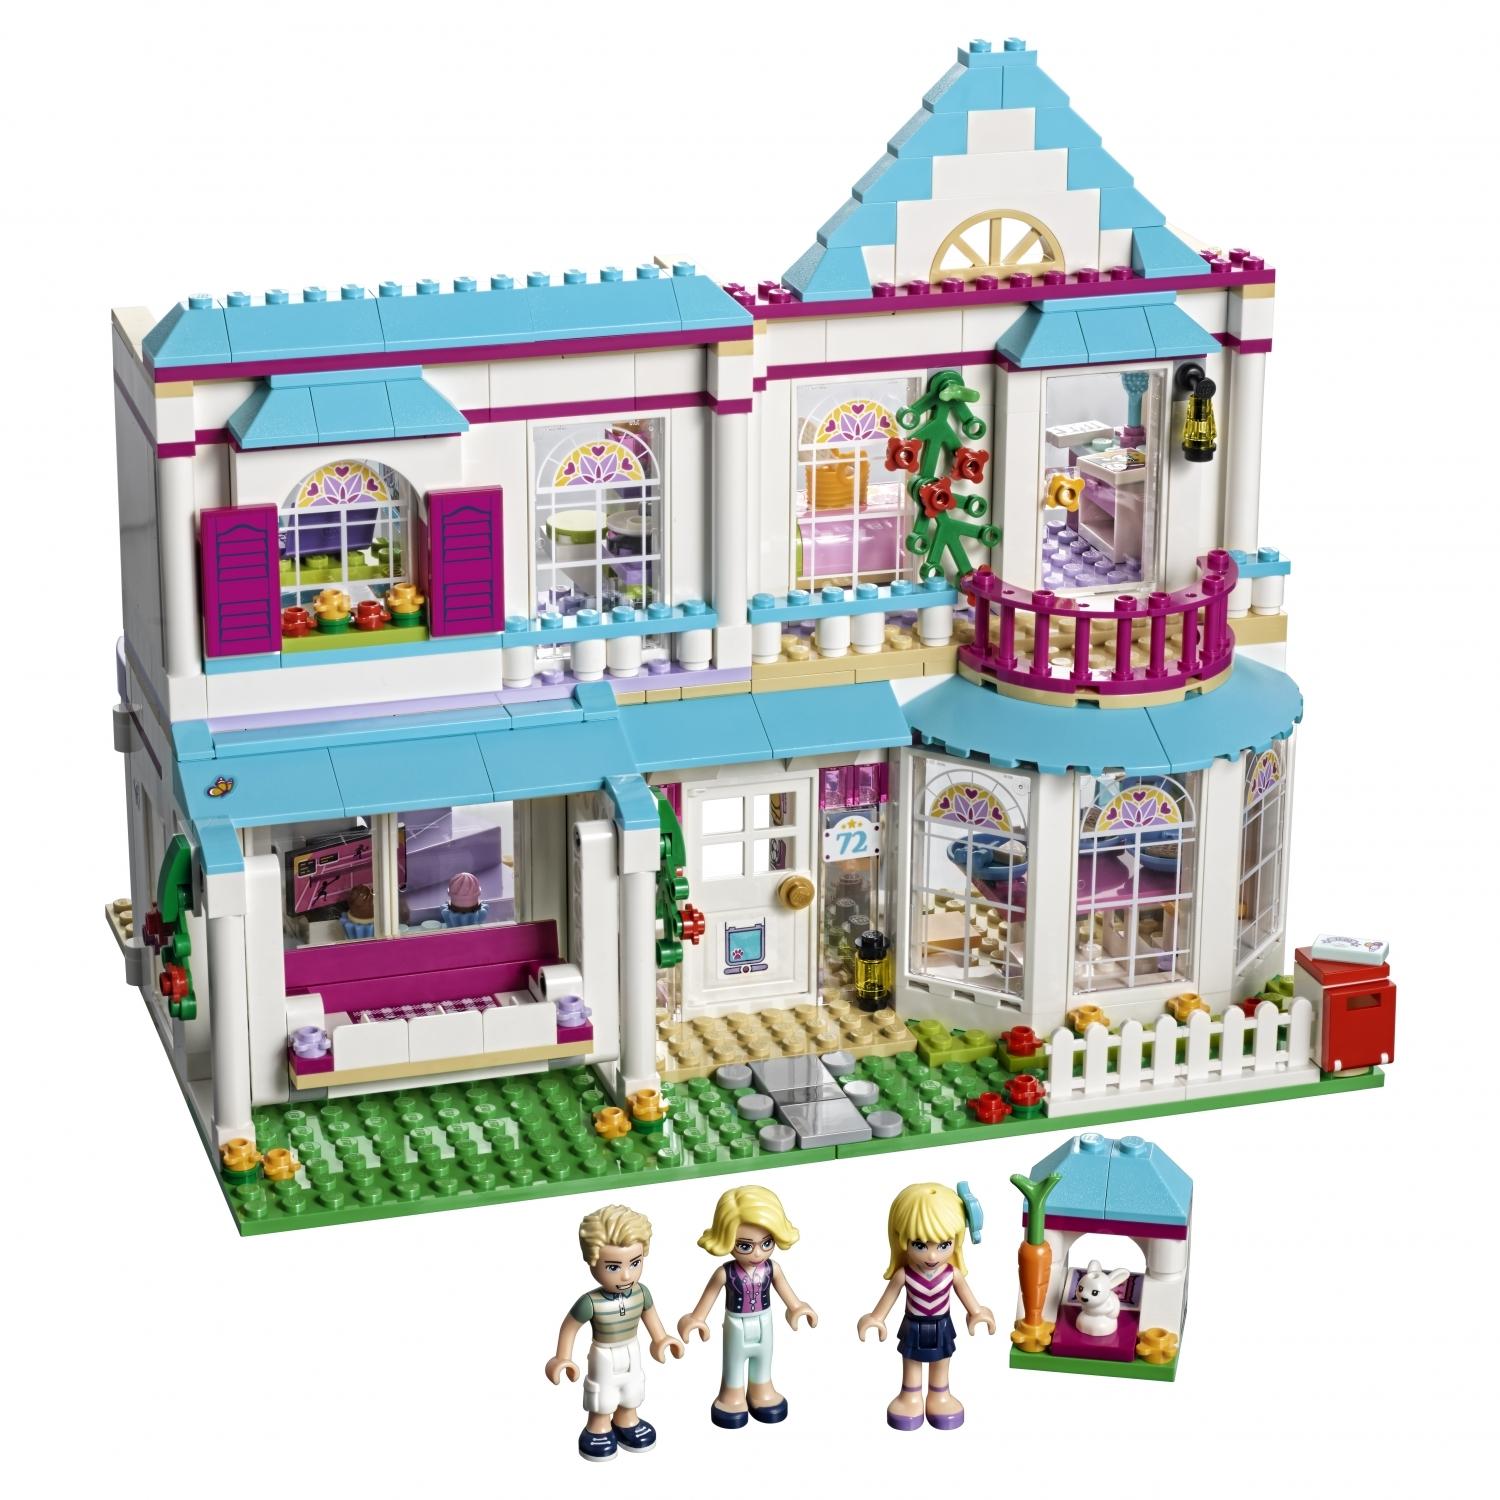 Lego Friends 41314 Дом Стефани